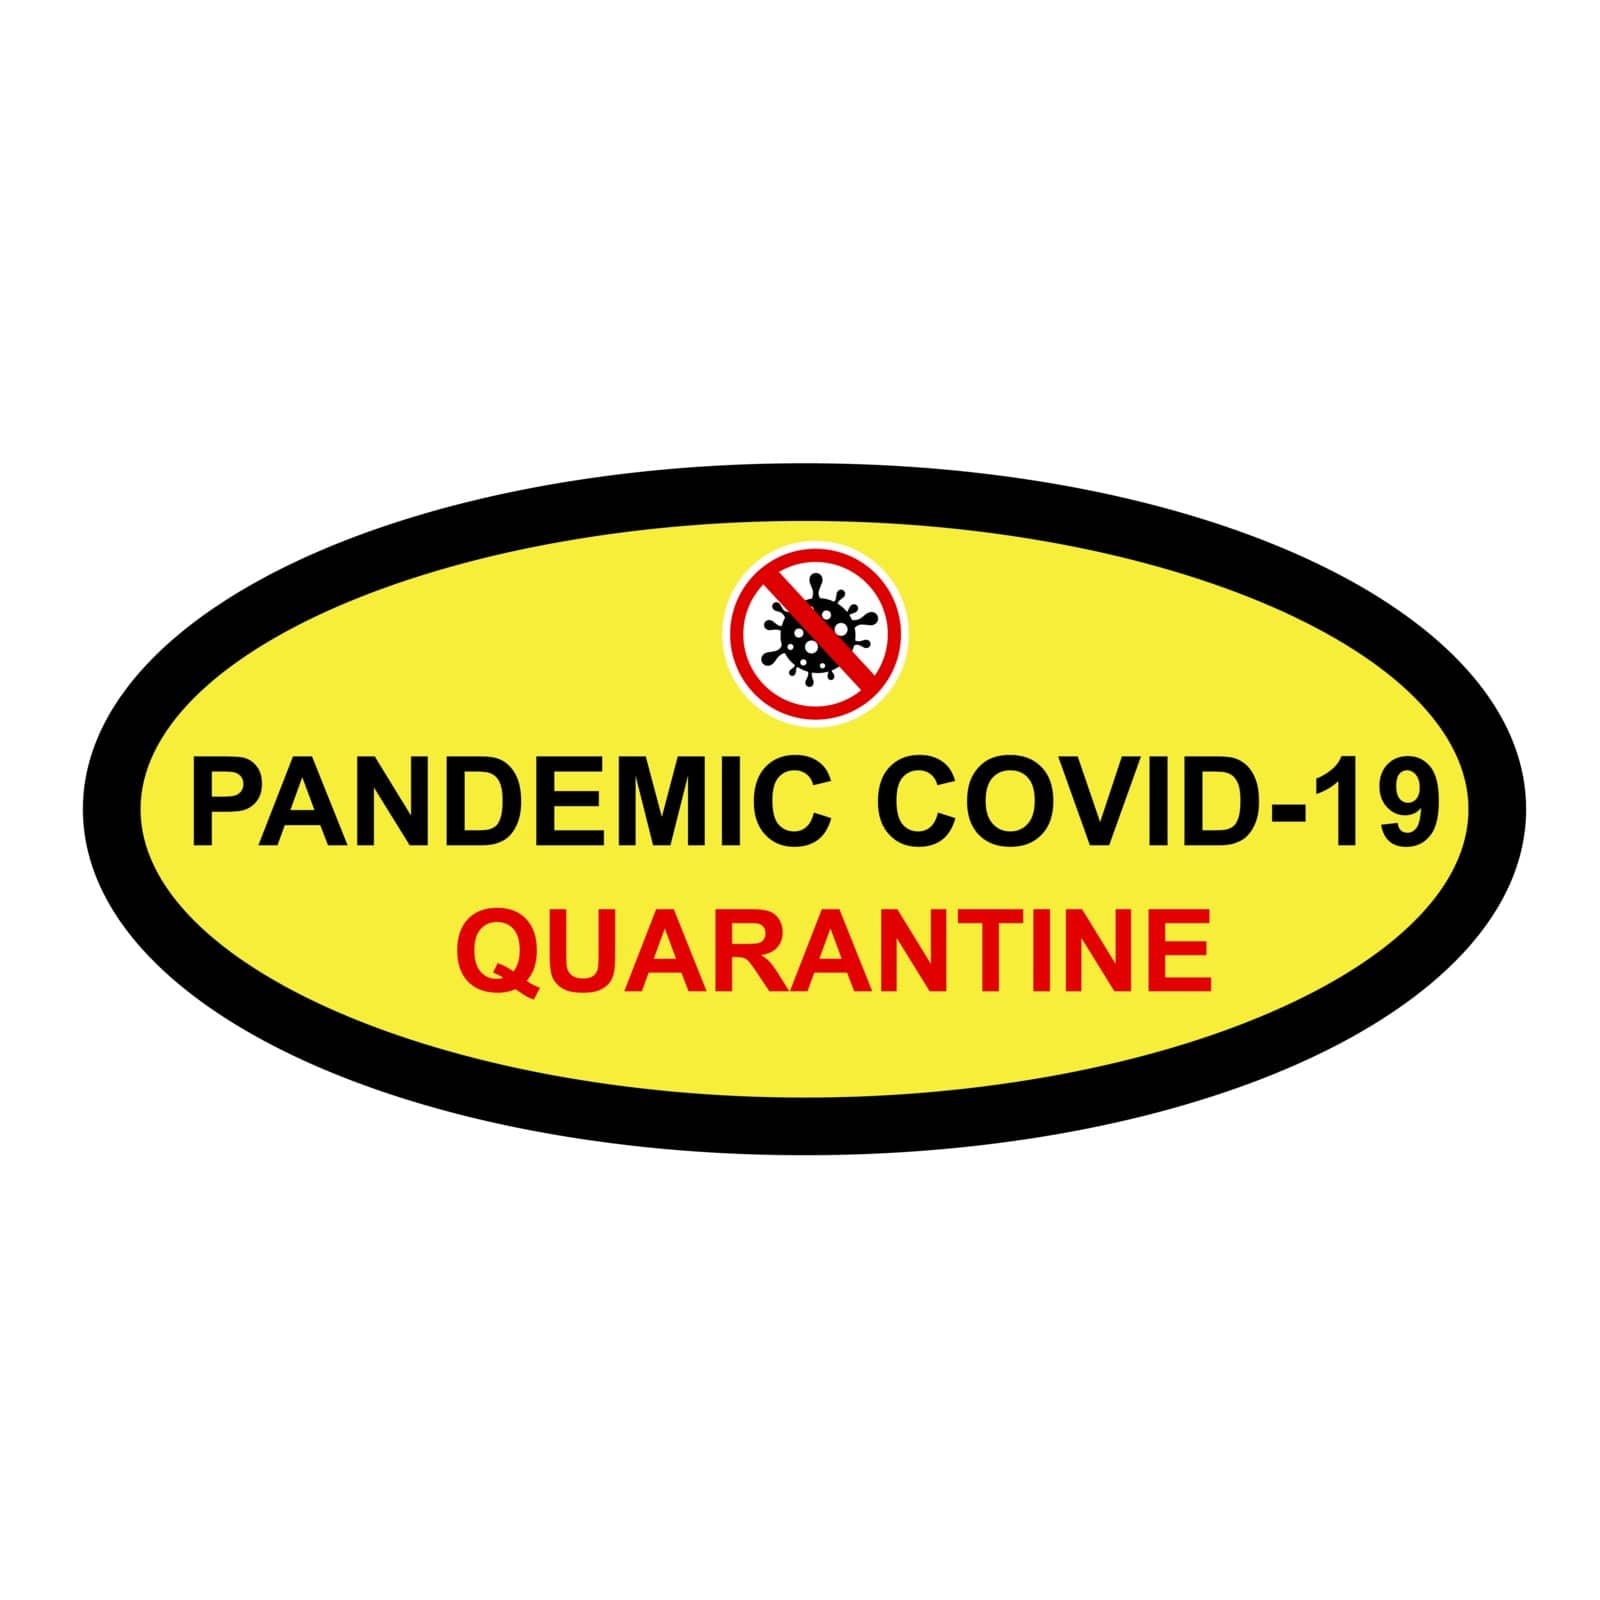 Sign Caution Warning, Quarantine Outbreak Alert from Covid-19